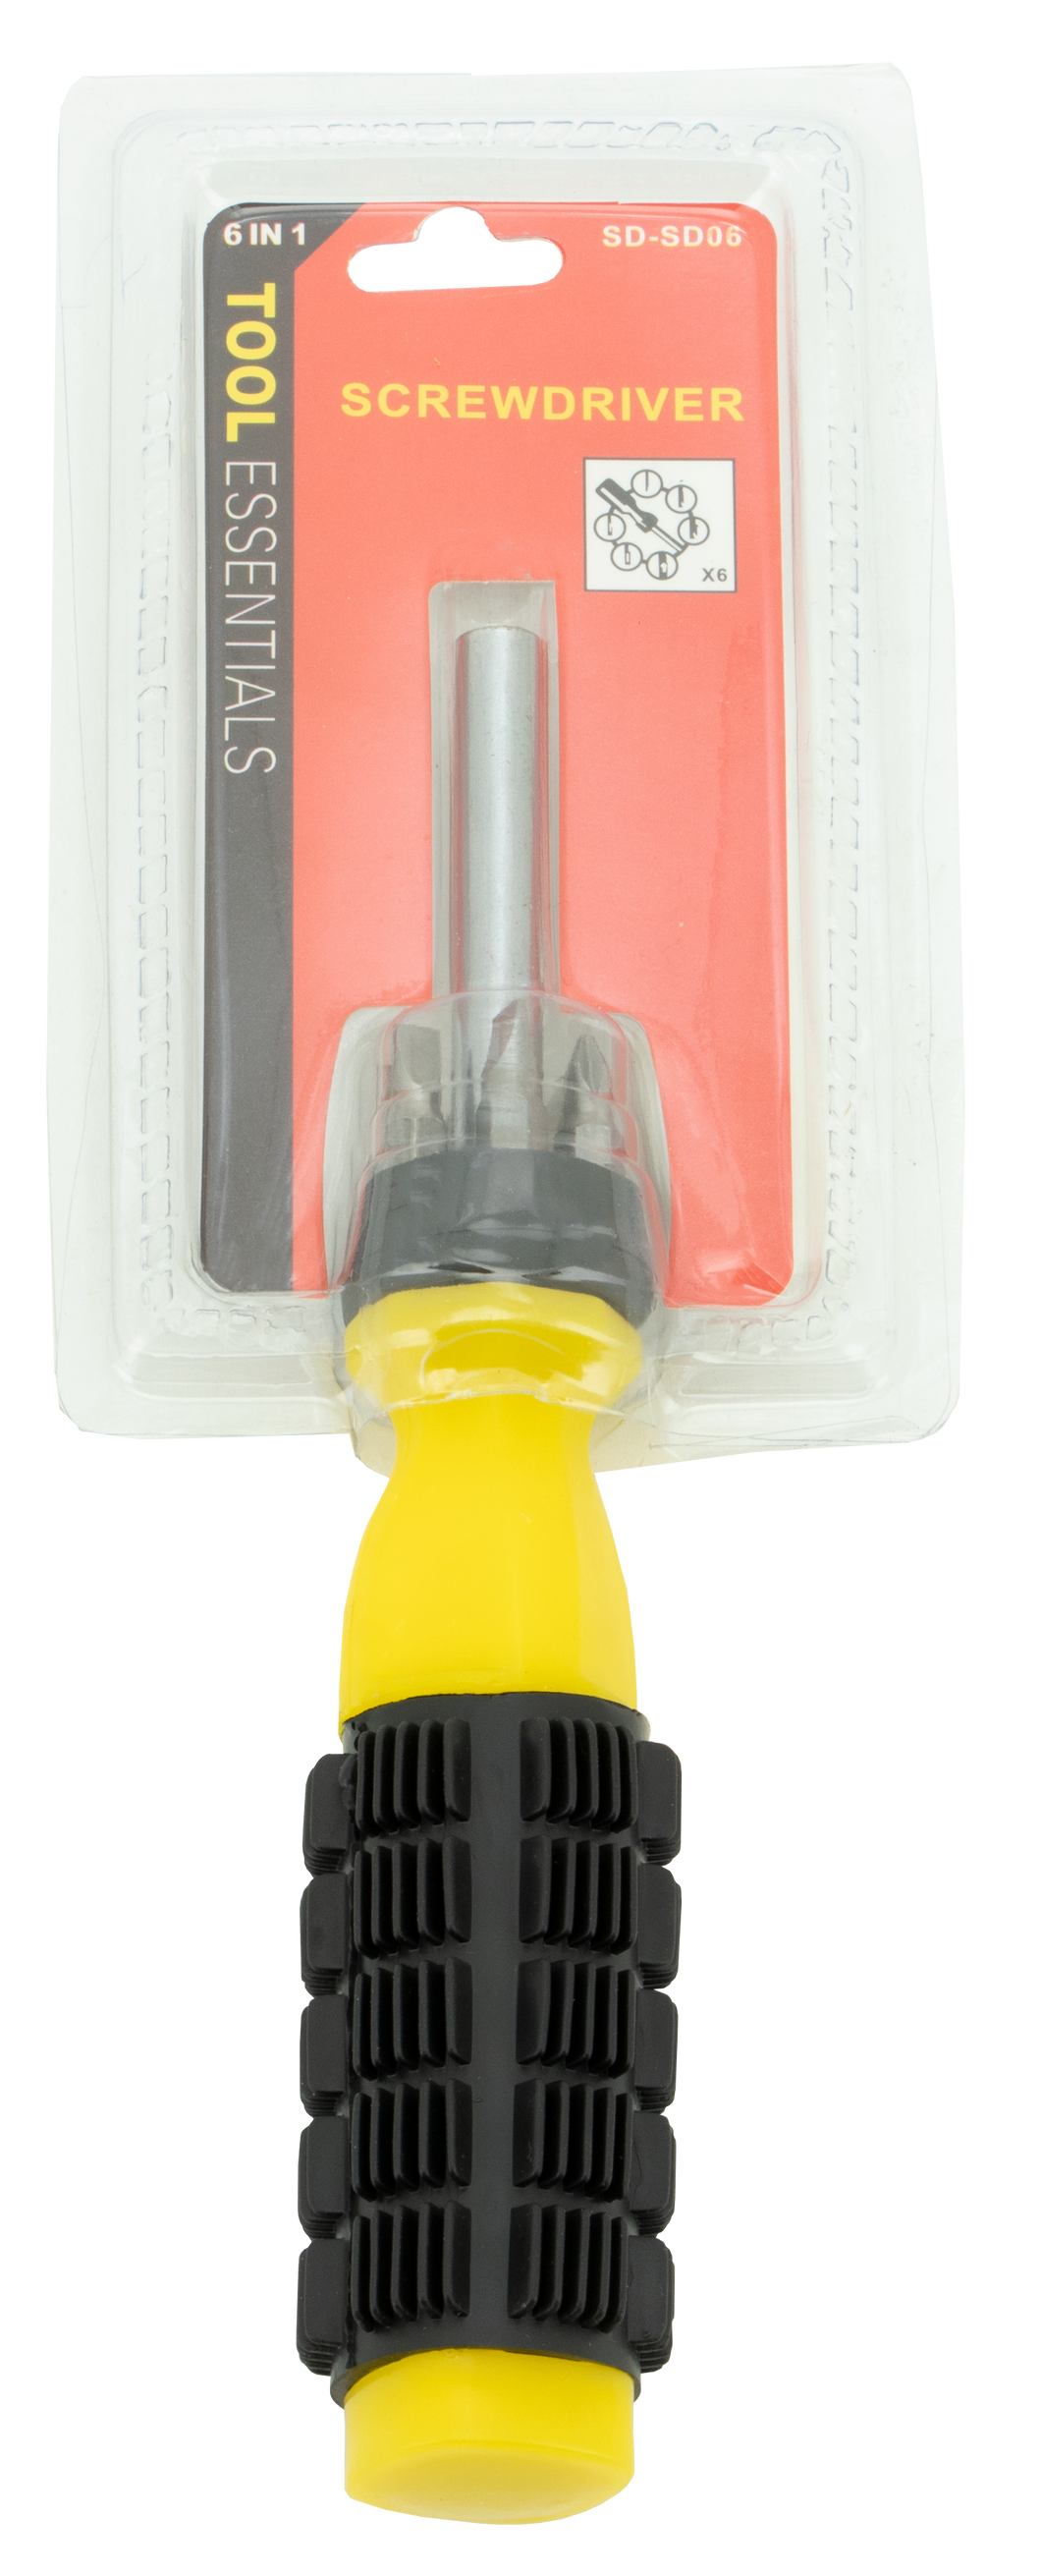 Screwdriver 6-IN-1 with Rubber Grip